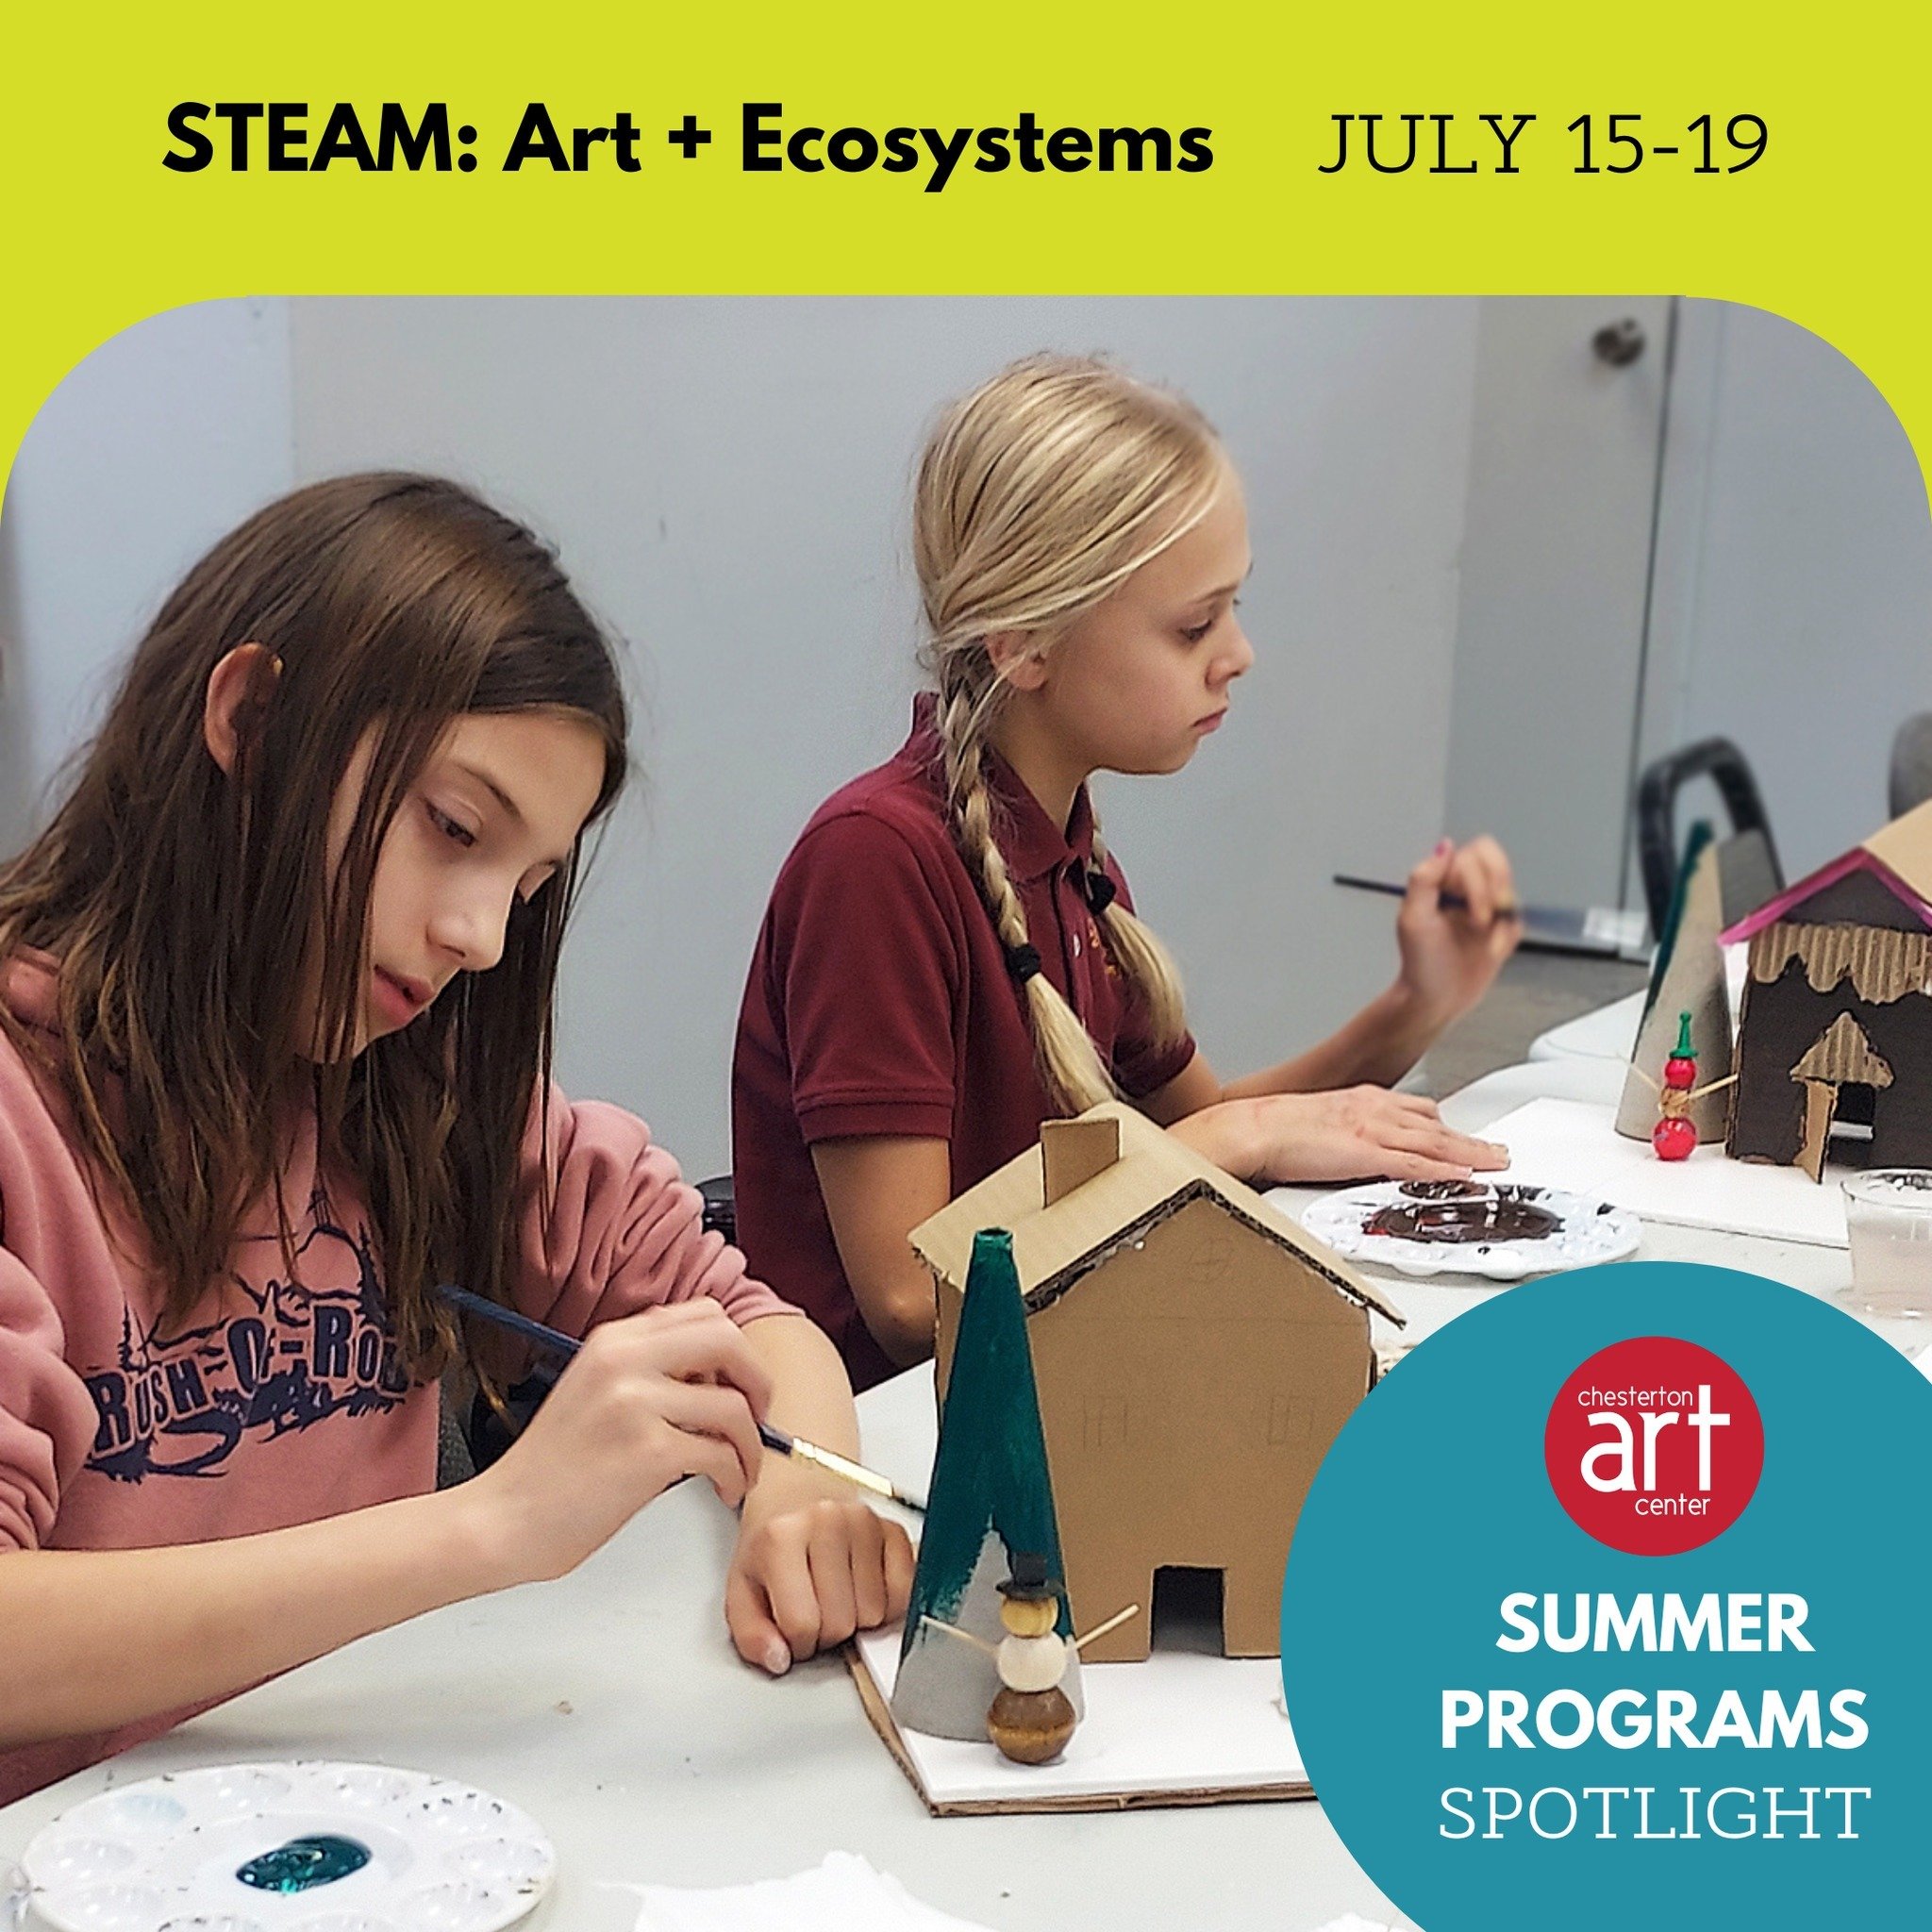 This week's Summer Program Spotlight features the STEAM: Art + Ecosystems Summer Art Camp, a wonderful option for those interested in art, science, and sculpting.

🟢 STEAM: Art + Ecosystems / July 15-19 / Ages 9-12 from 12-2:30 PM / Instructor Emily